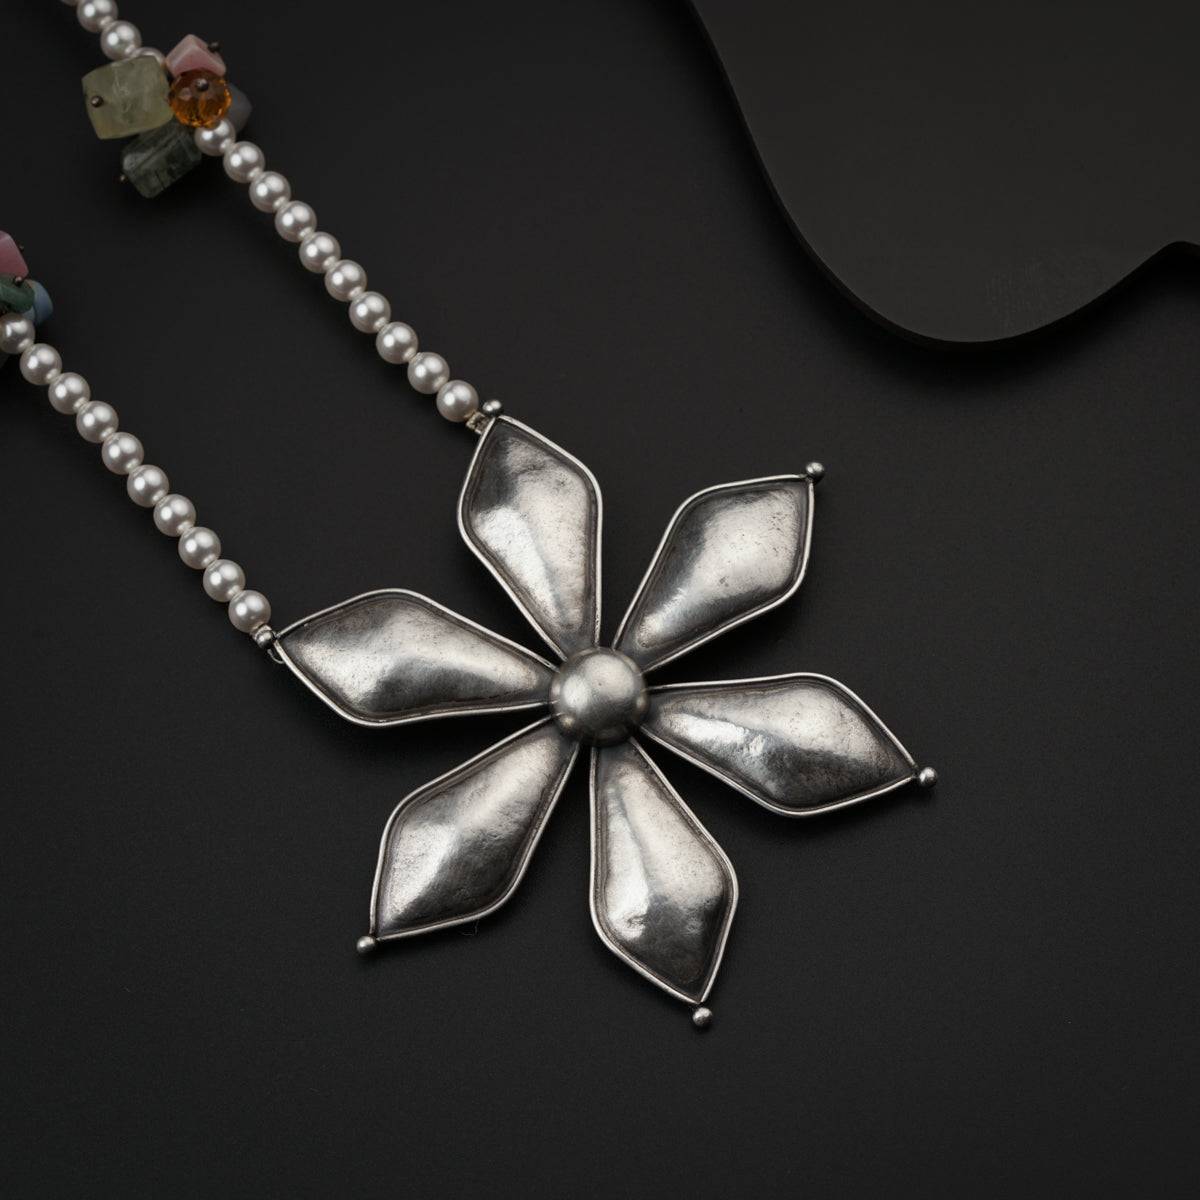 Flower Pendant Necklace with Pearls & Semi Precious Stones